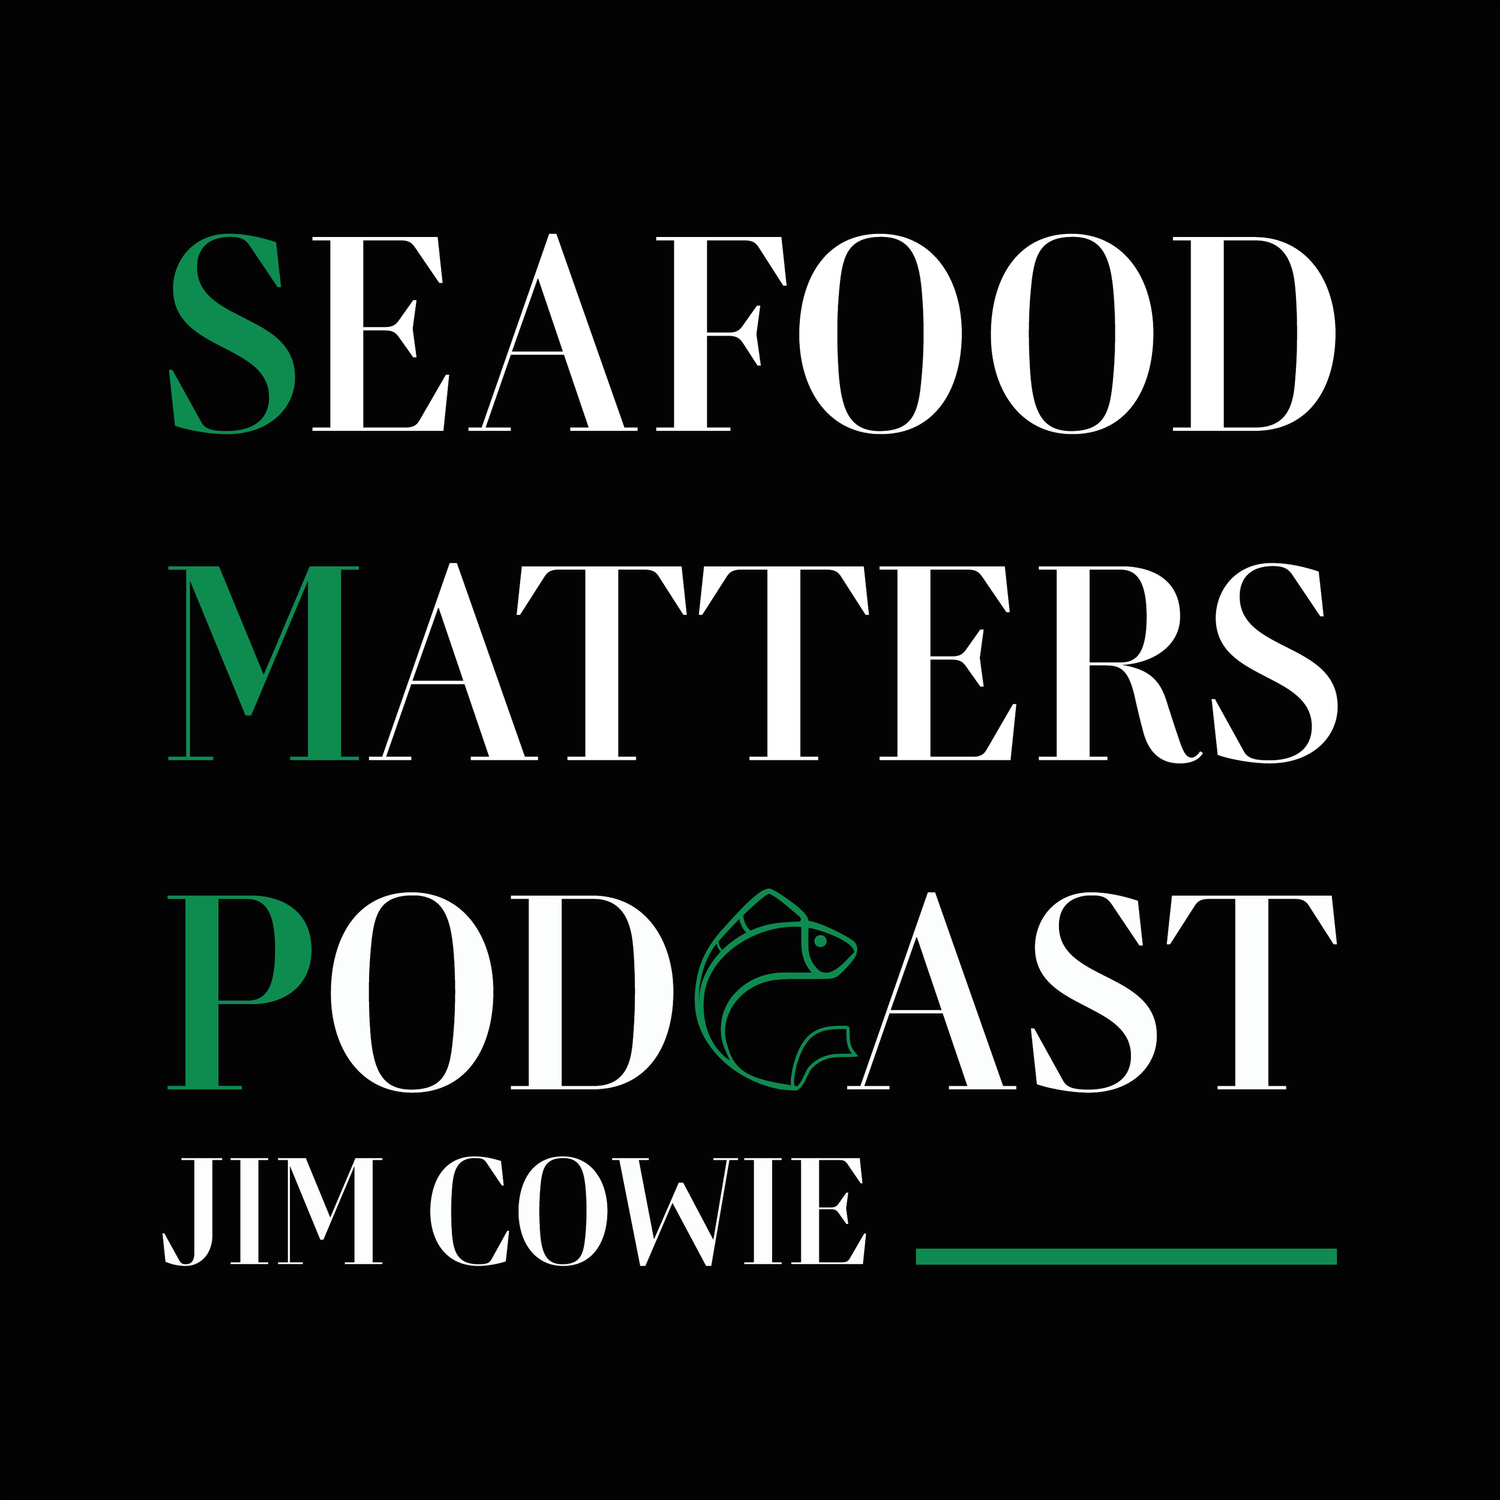 Seafood Matters